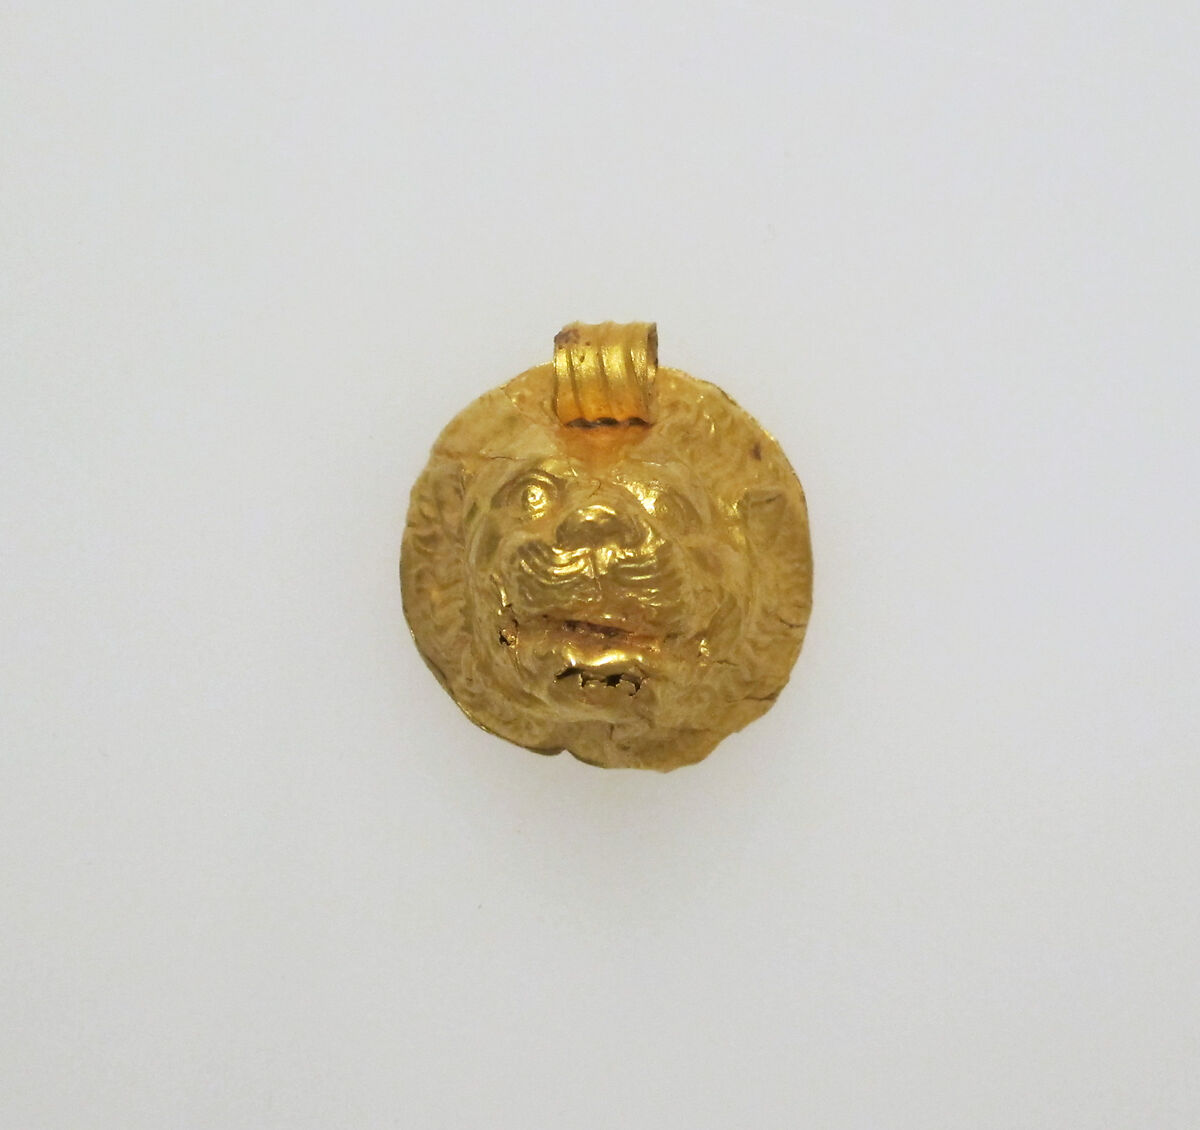 Pendant in the form a lion's head, Gold, Greek 